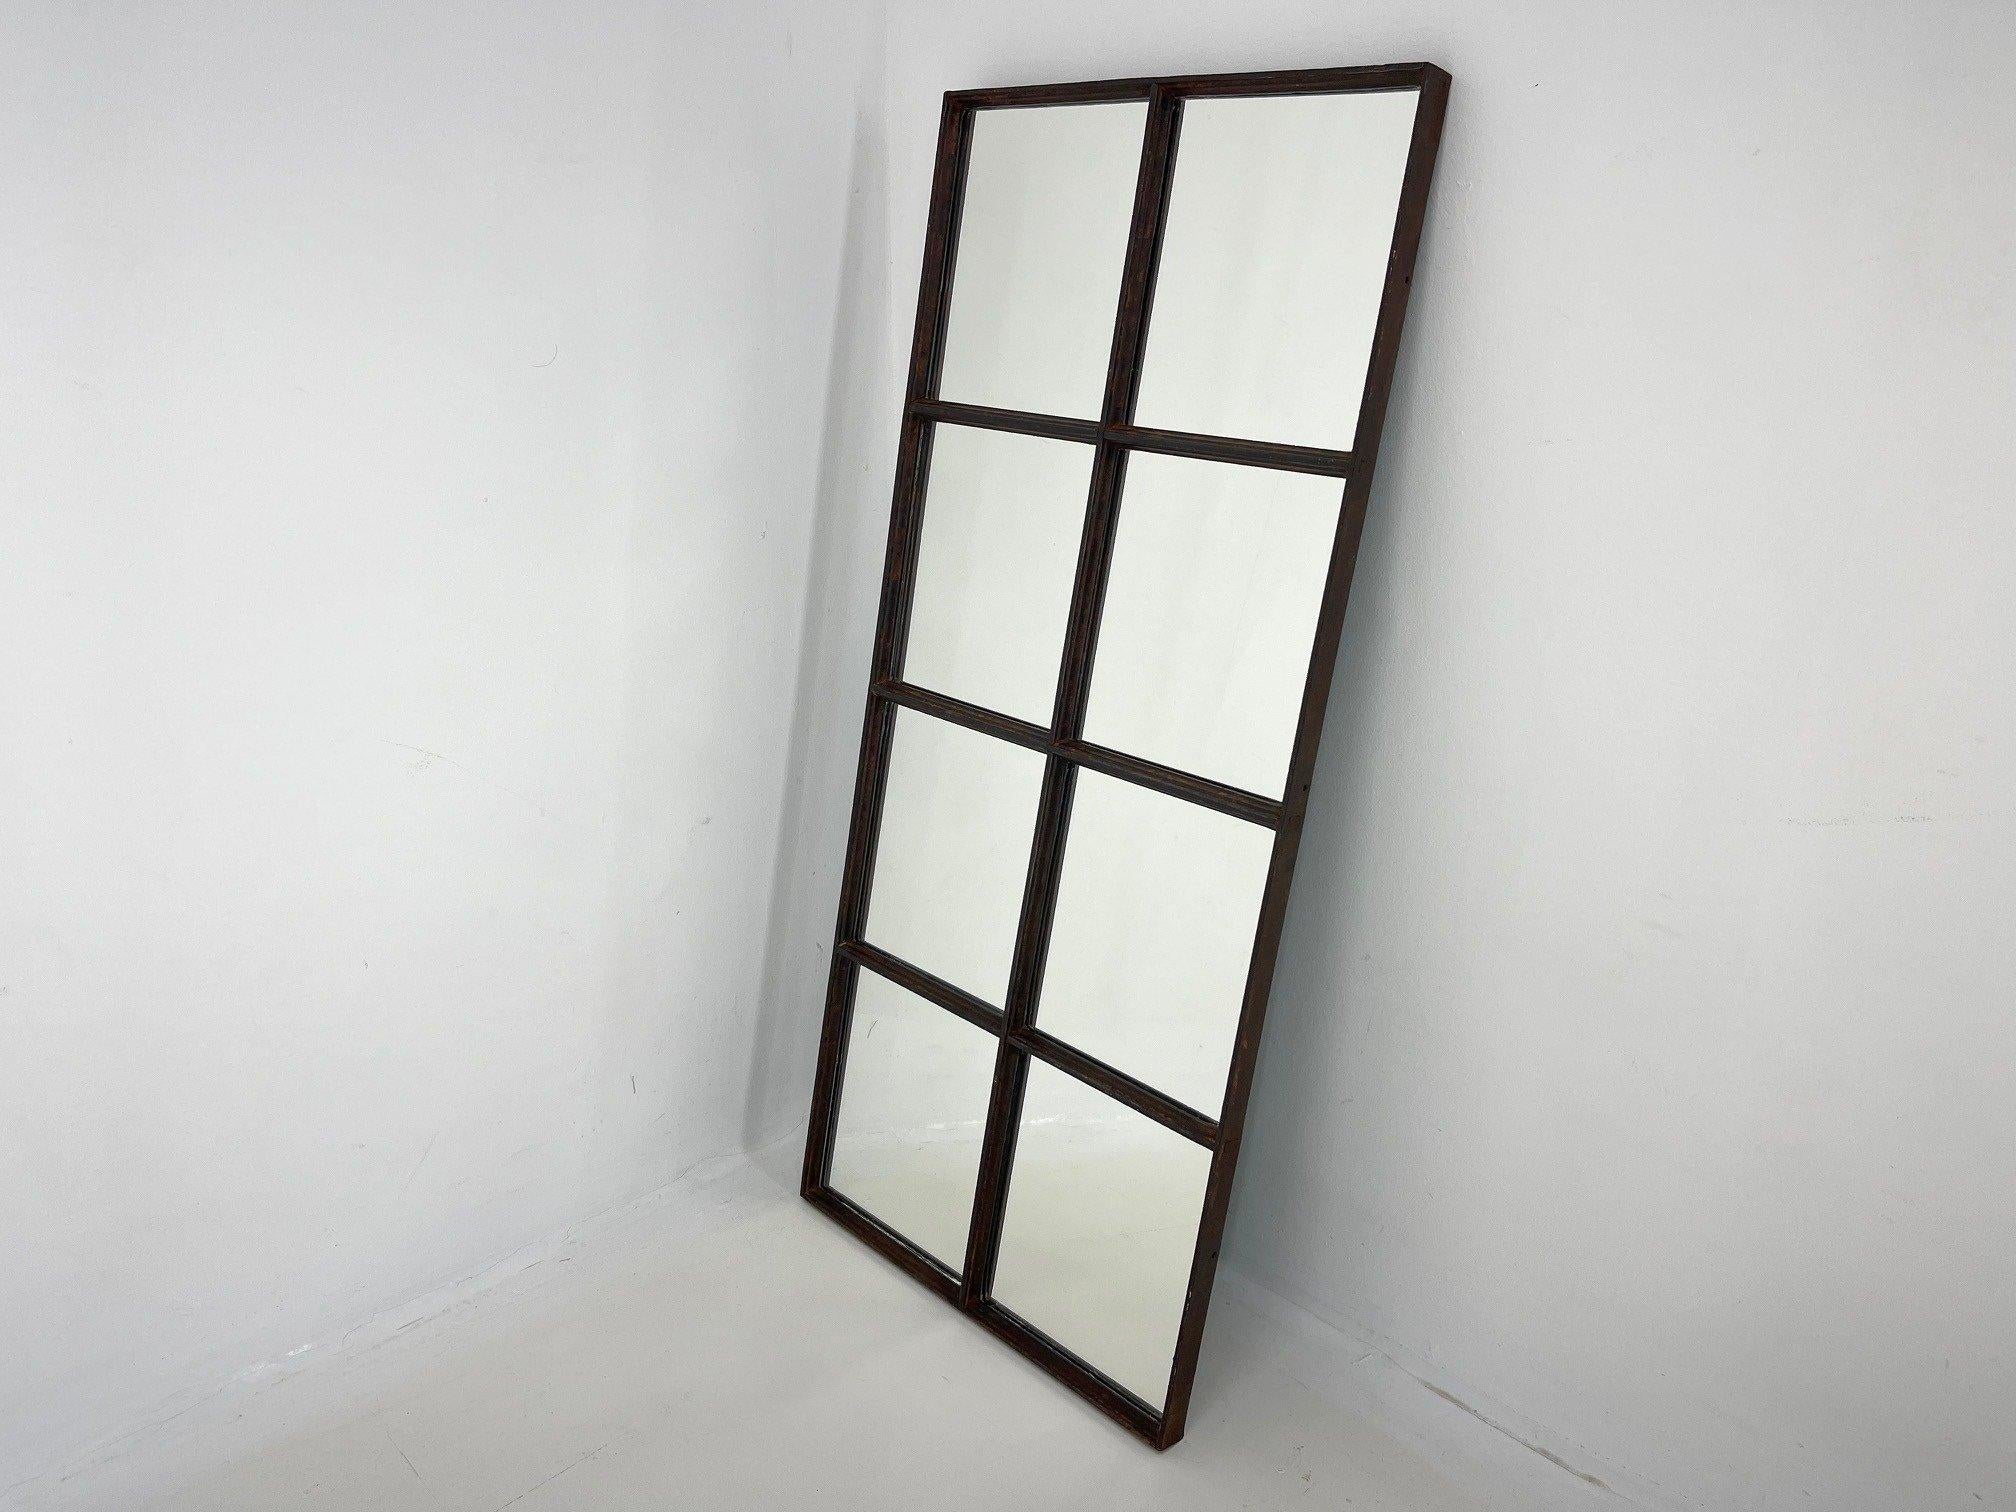 Czech Set of 2 Vintage Industrial Iron Windows Converted to a Mirror For Sale